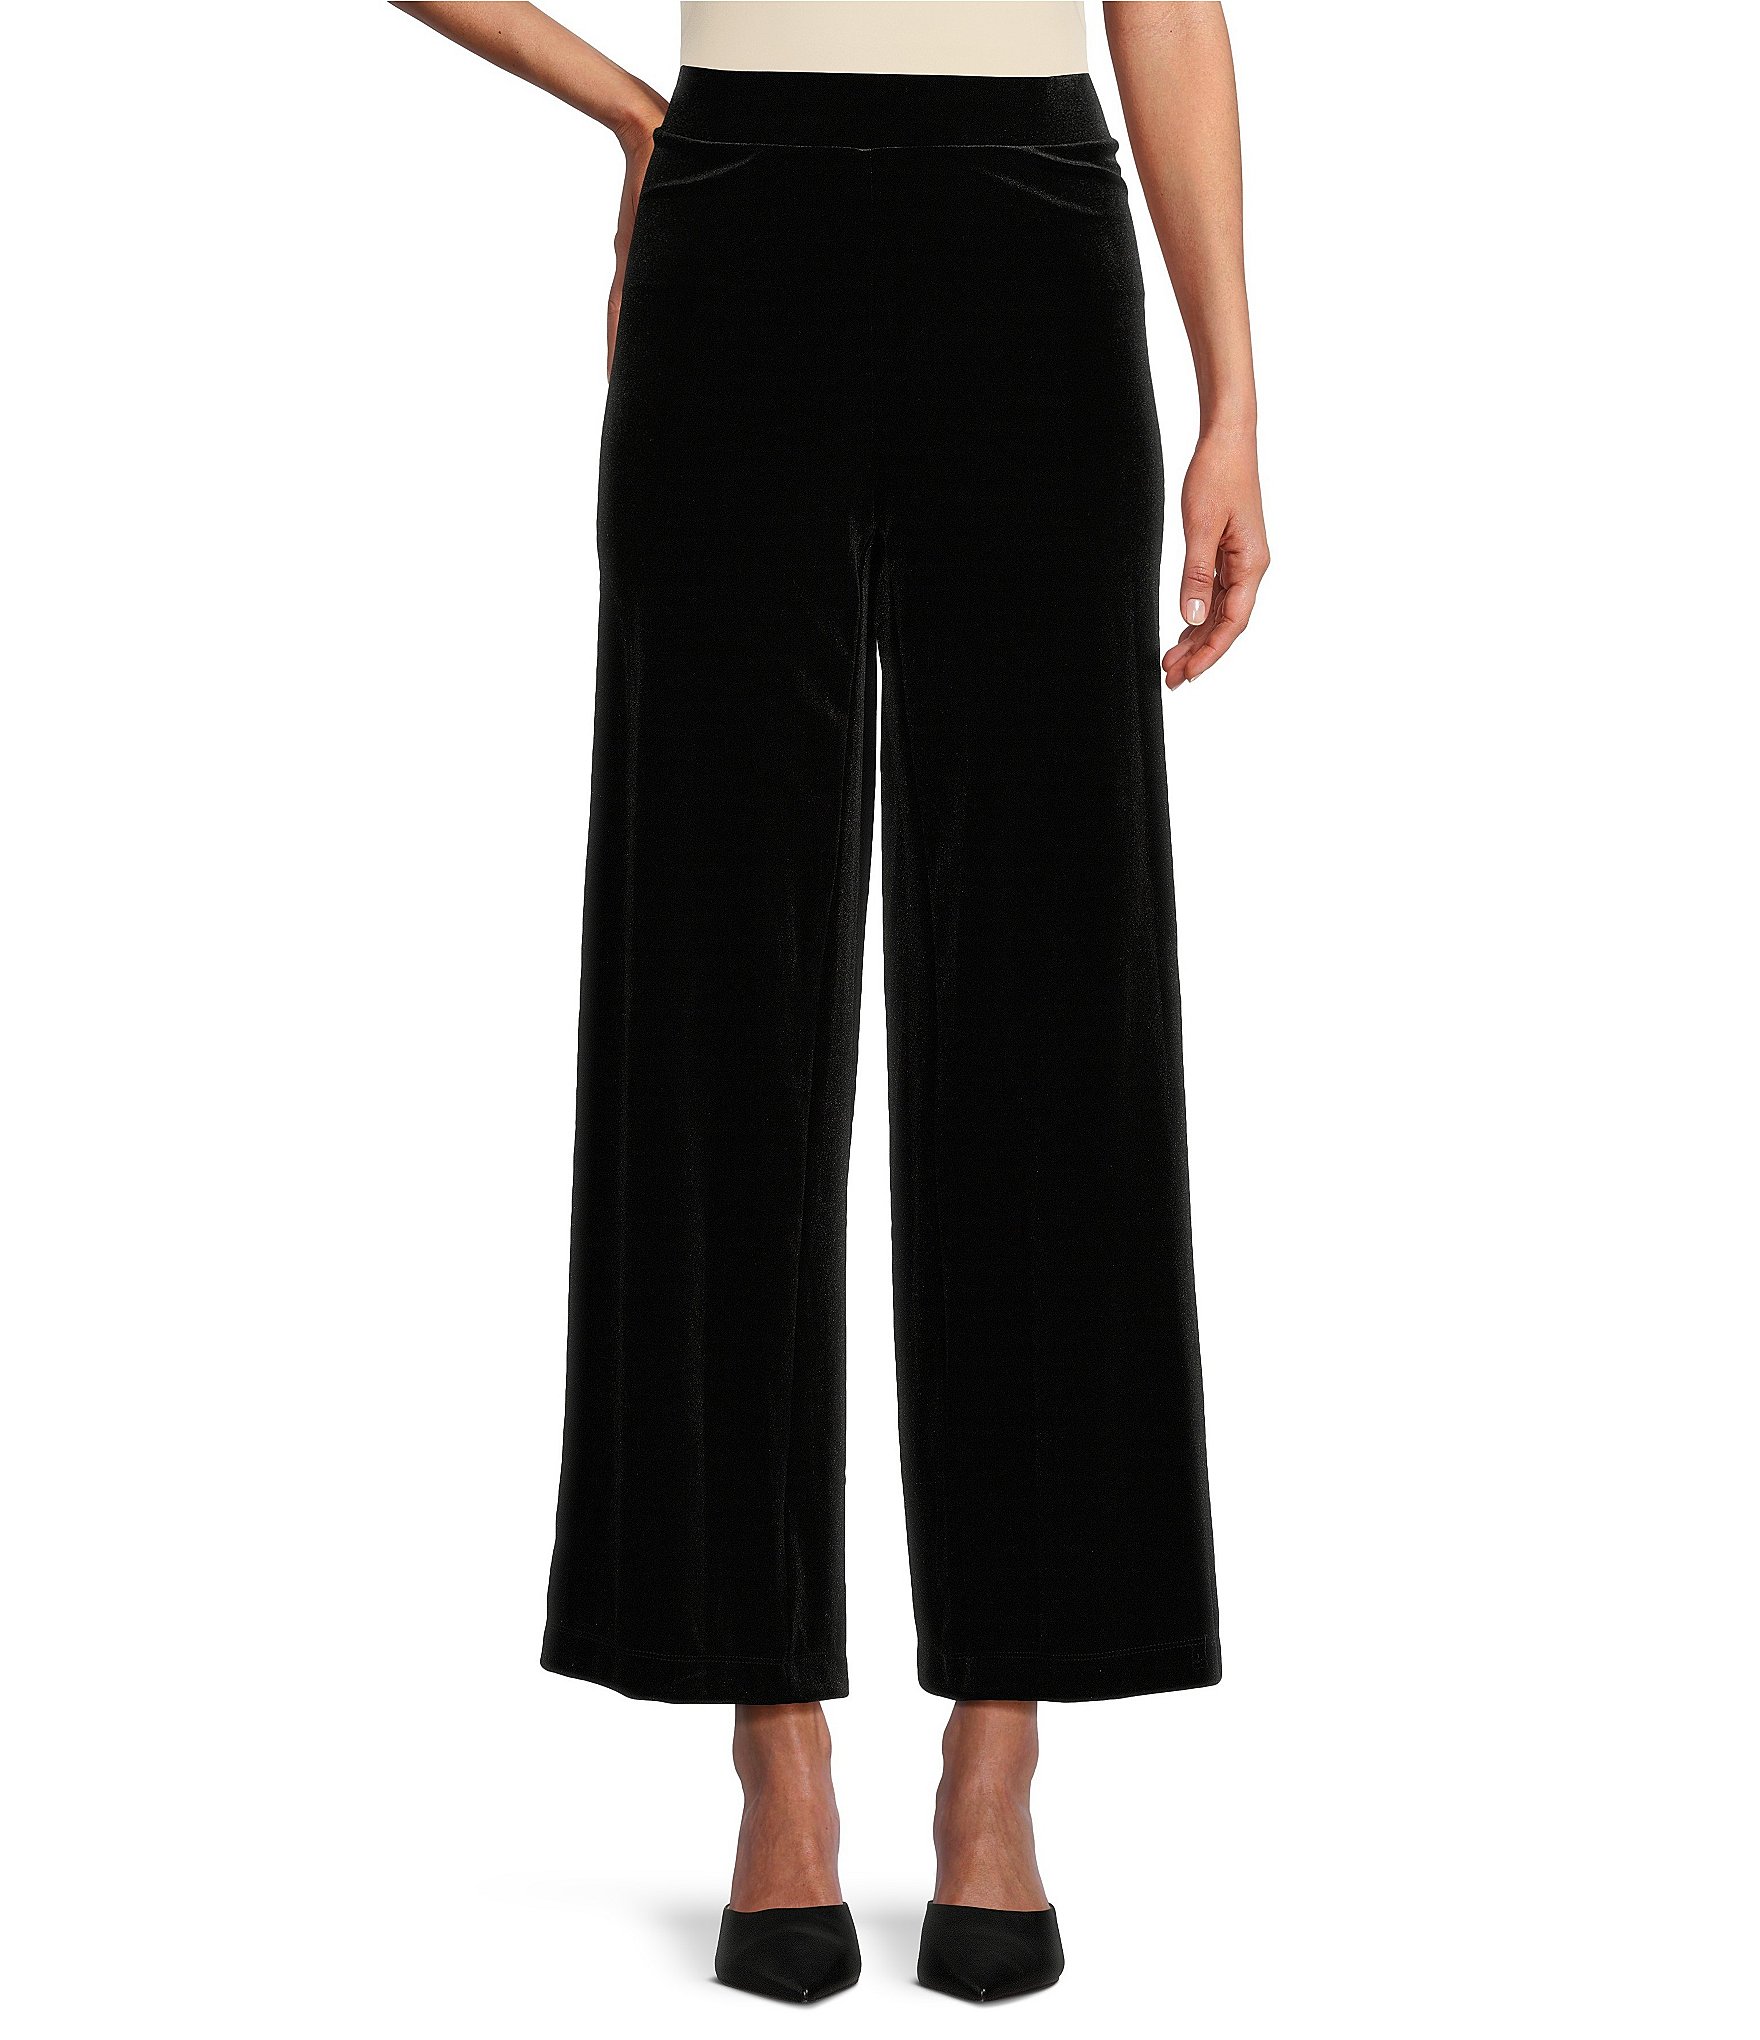 Multiples Petite Size Solid Stretch Velvet Knit Wide-Leg Pull-On Pants ...